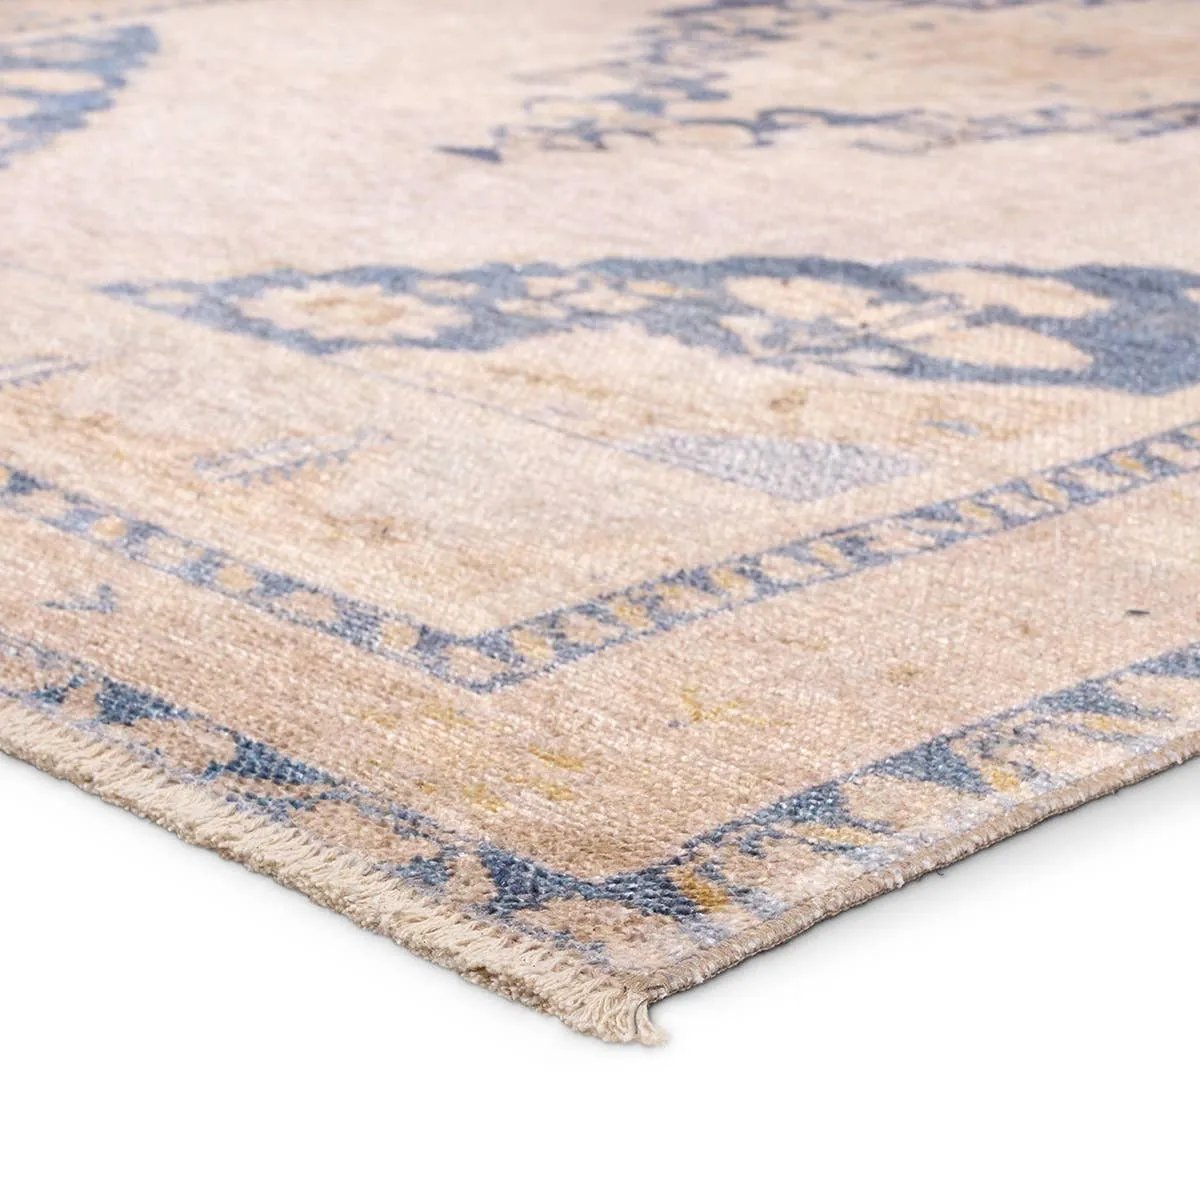 Distressed, vintage designs offer an elevated tone for the Lumal Collection. The Debolo rug features a vintage-inspired medallion, geometric border, and floral detailing in tones of tan, blue, yellow, and gray. This machine washable rug is stain resistant and easy to clean, perfect for homes with children and pets. Amethyst Home provides interior design, new home construction design consulting, vintage area rugs, and lighting in the Charlotte metro area.